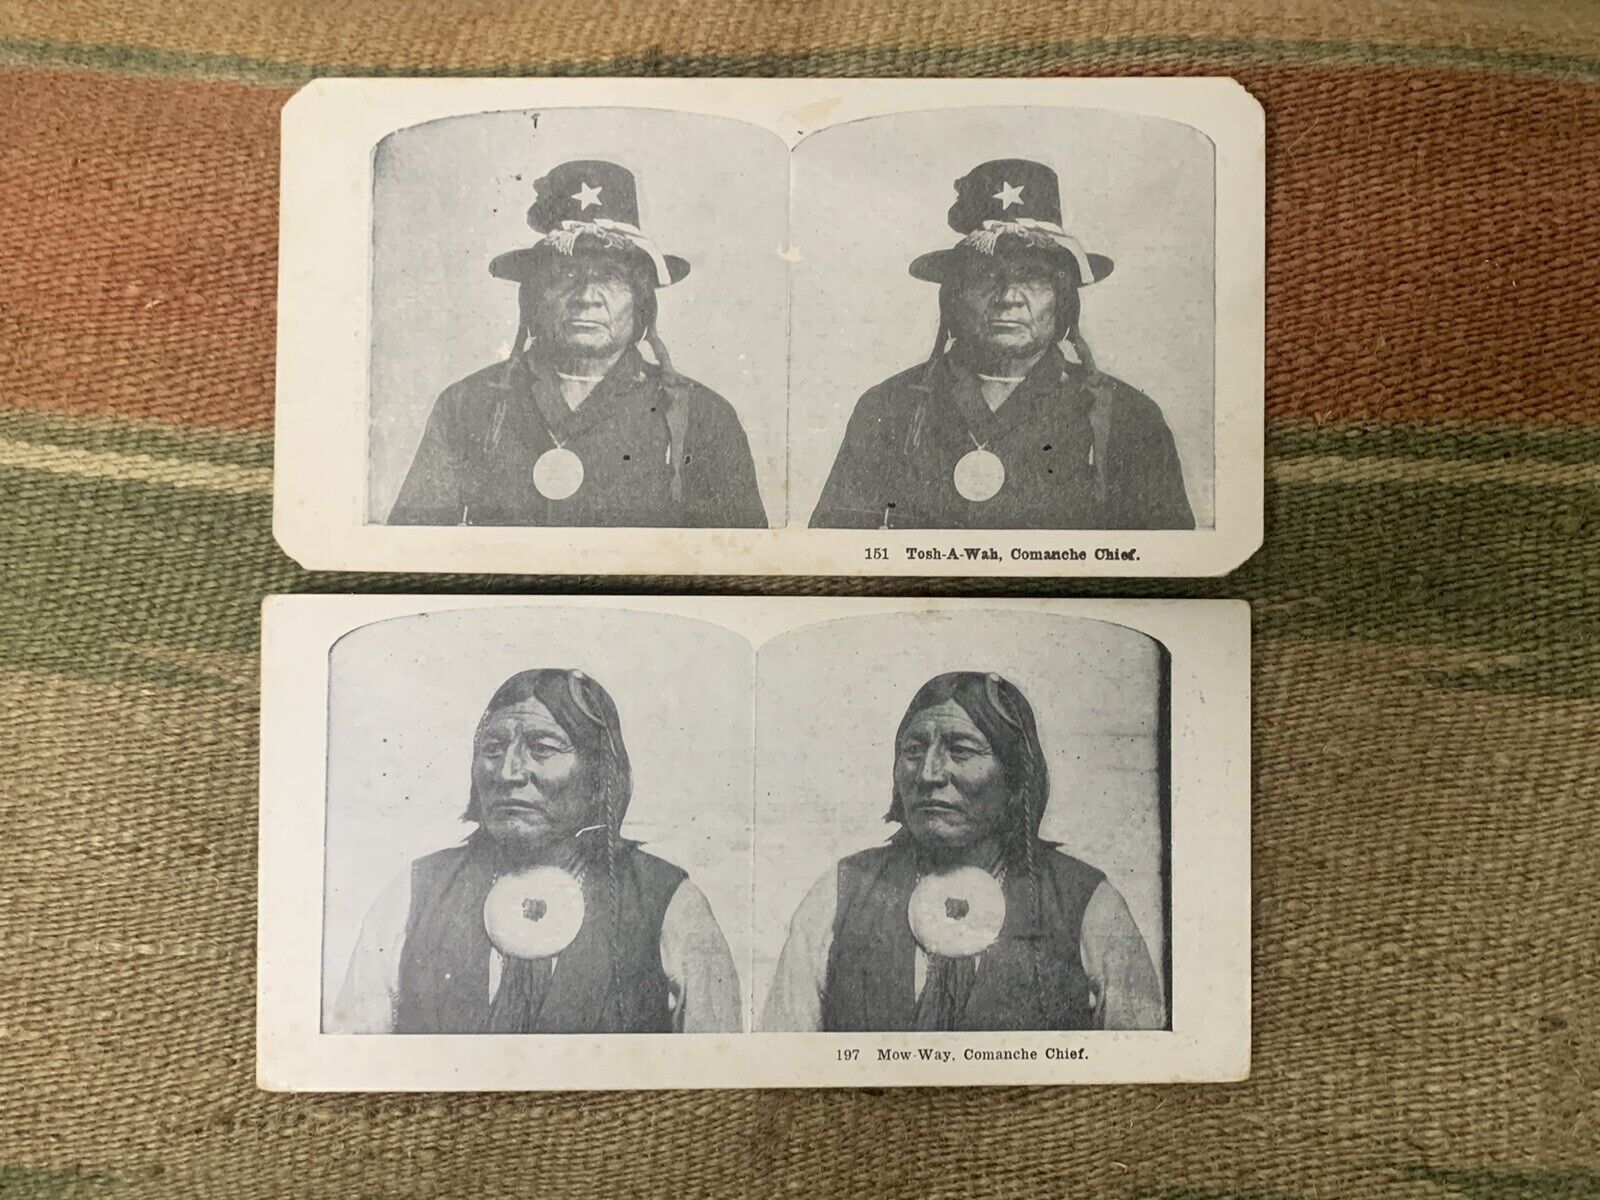 Antique Native American Comanche Chief Photographs/Stereographs - 19th Century